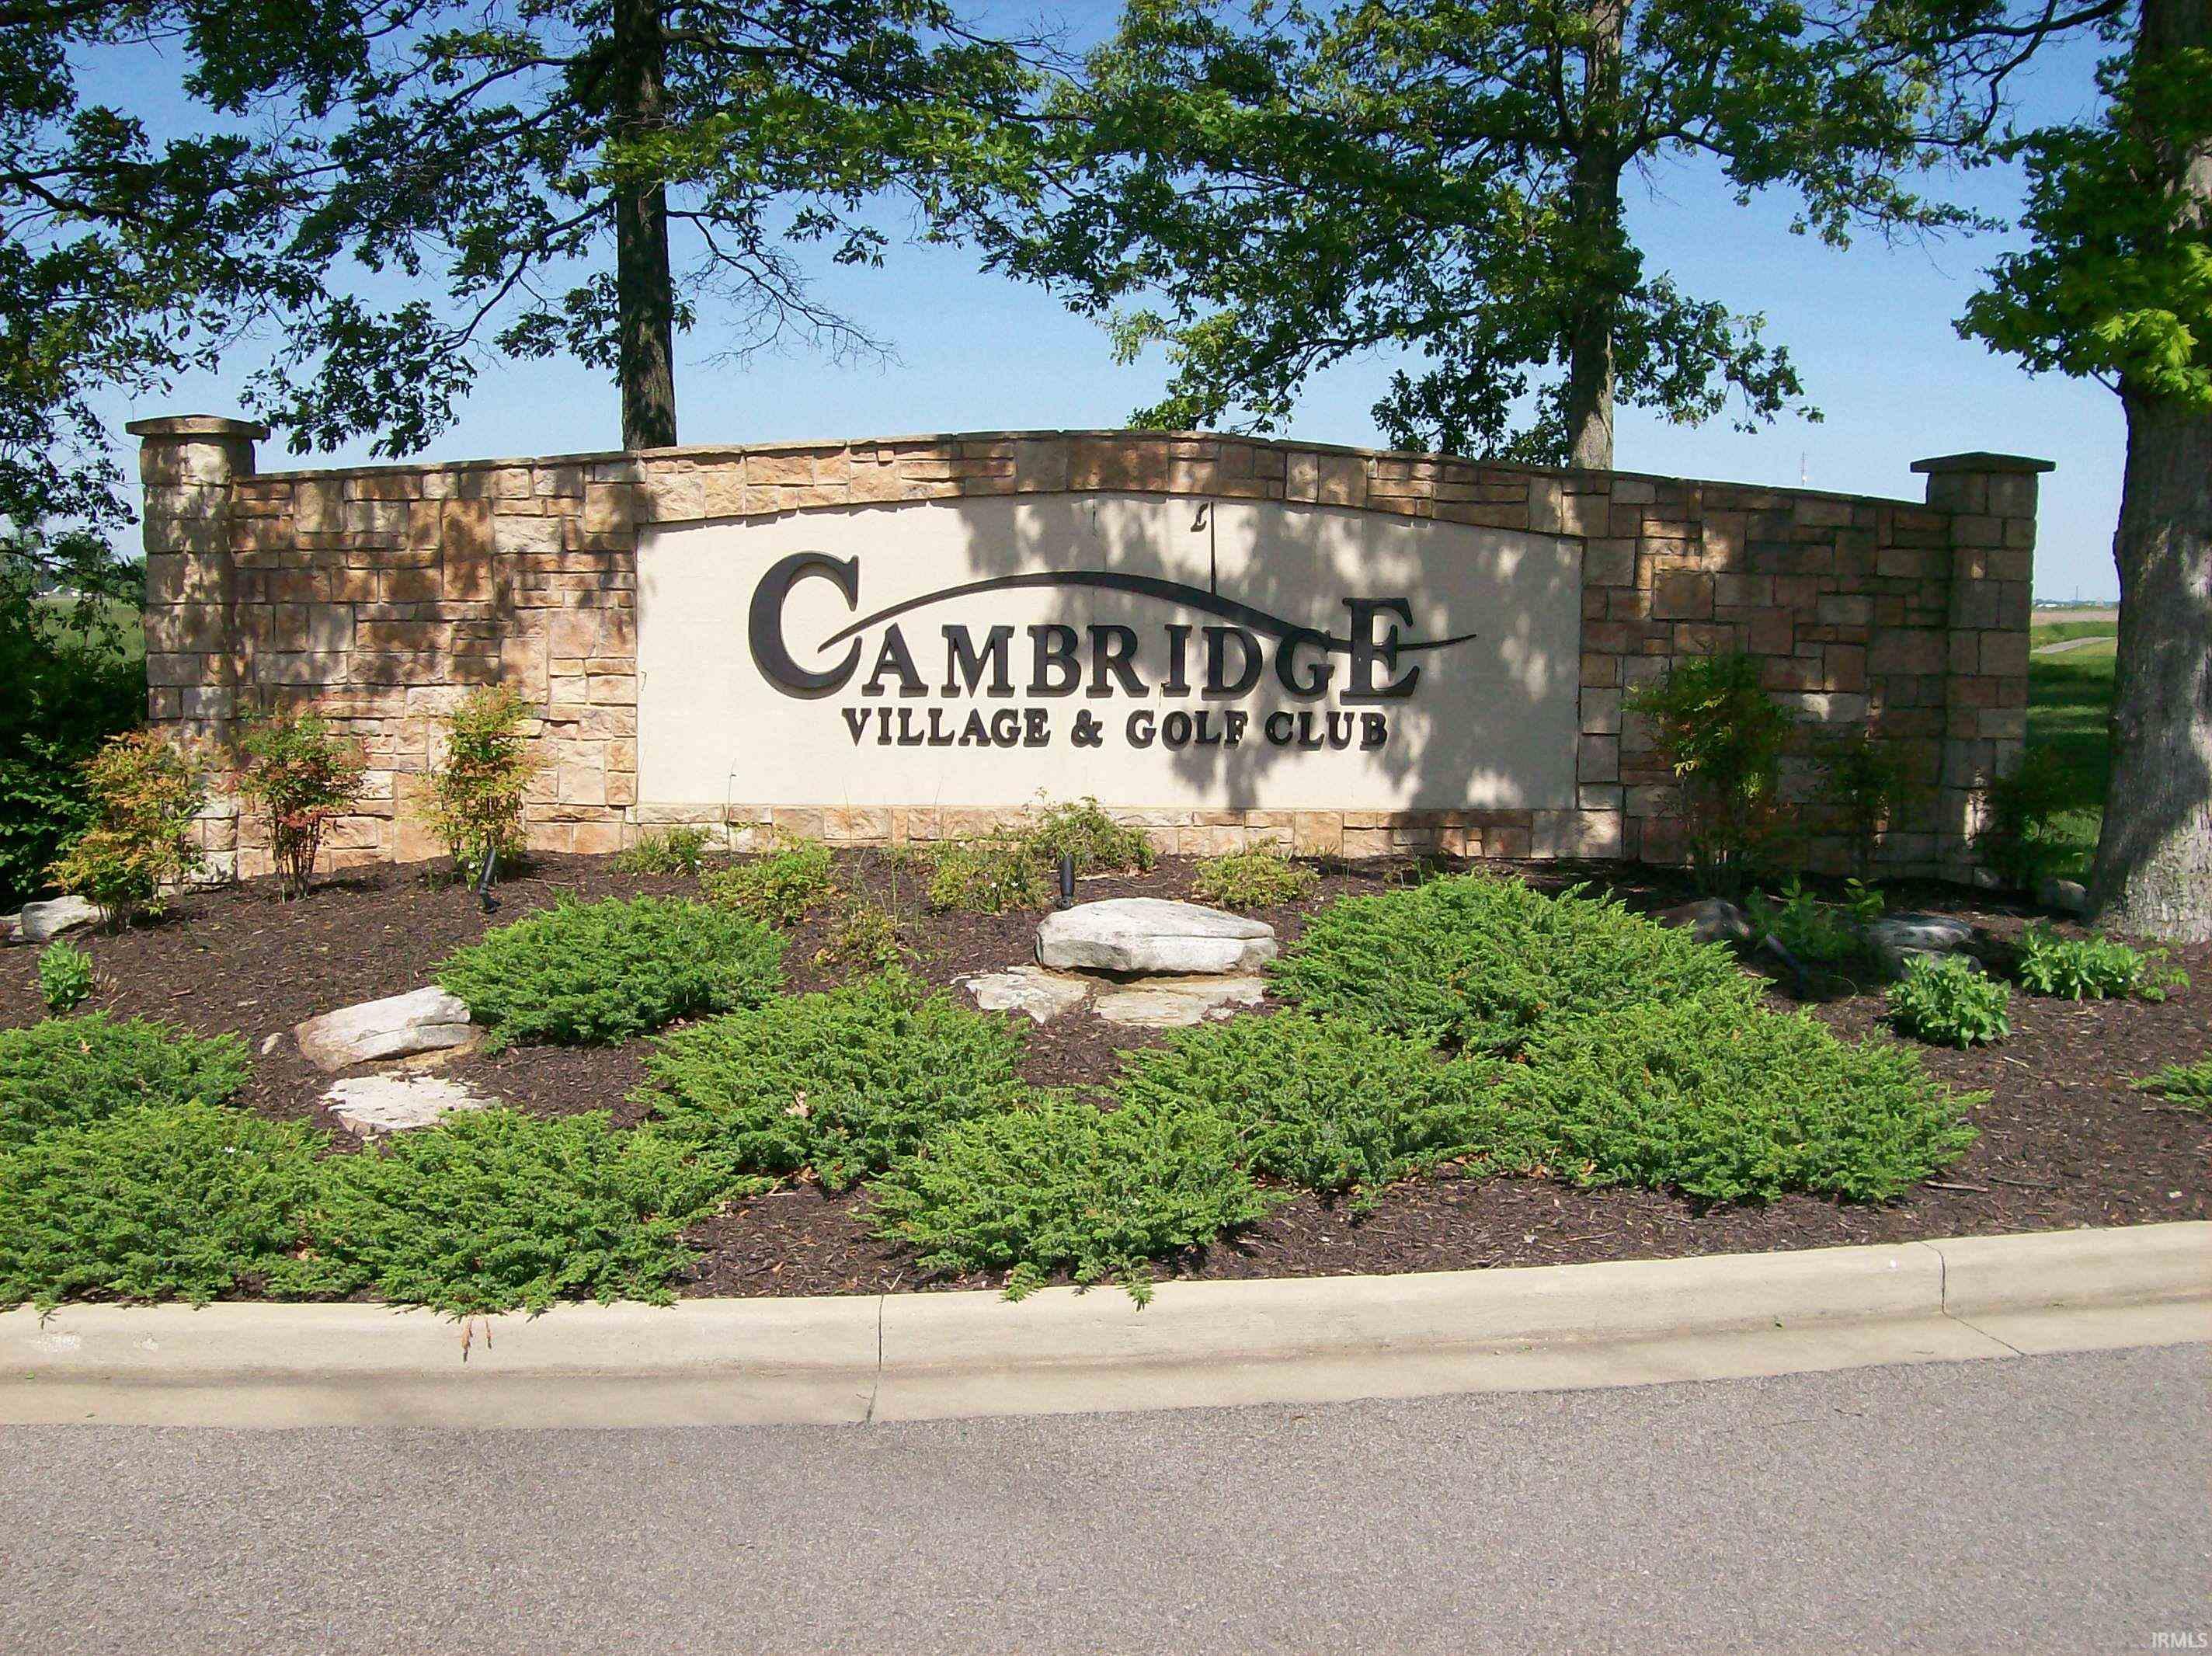 Welcome to Cambridge Village...home of an 18 hole golf course, Pro Shop, Driving Range & Putting, Grill/Restaurant, Banquet hall. $600 Annual HOA fees: Weekly trash pickup, Pool, Pickleball/tennis, Basketball, Activity Center w/Fitness, & streetlighting.